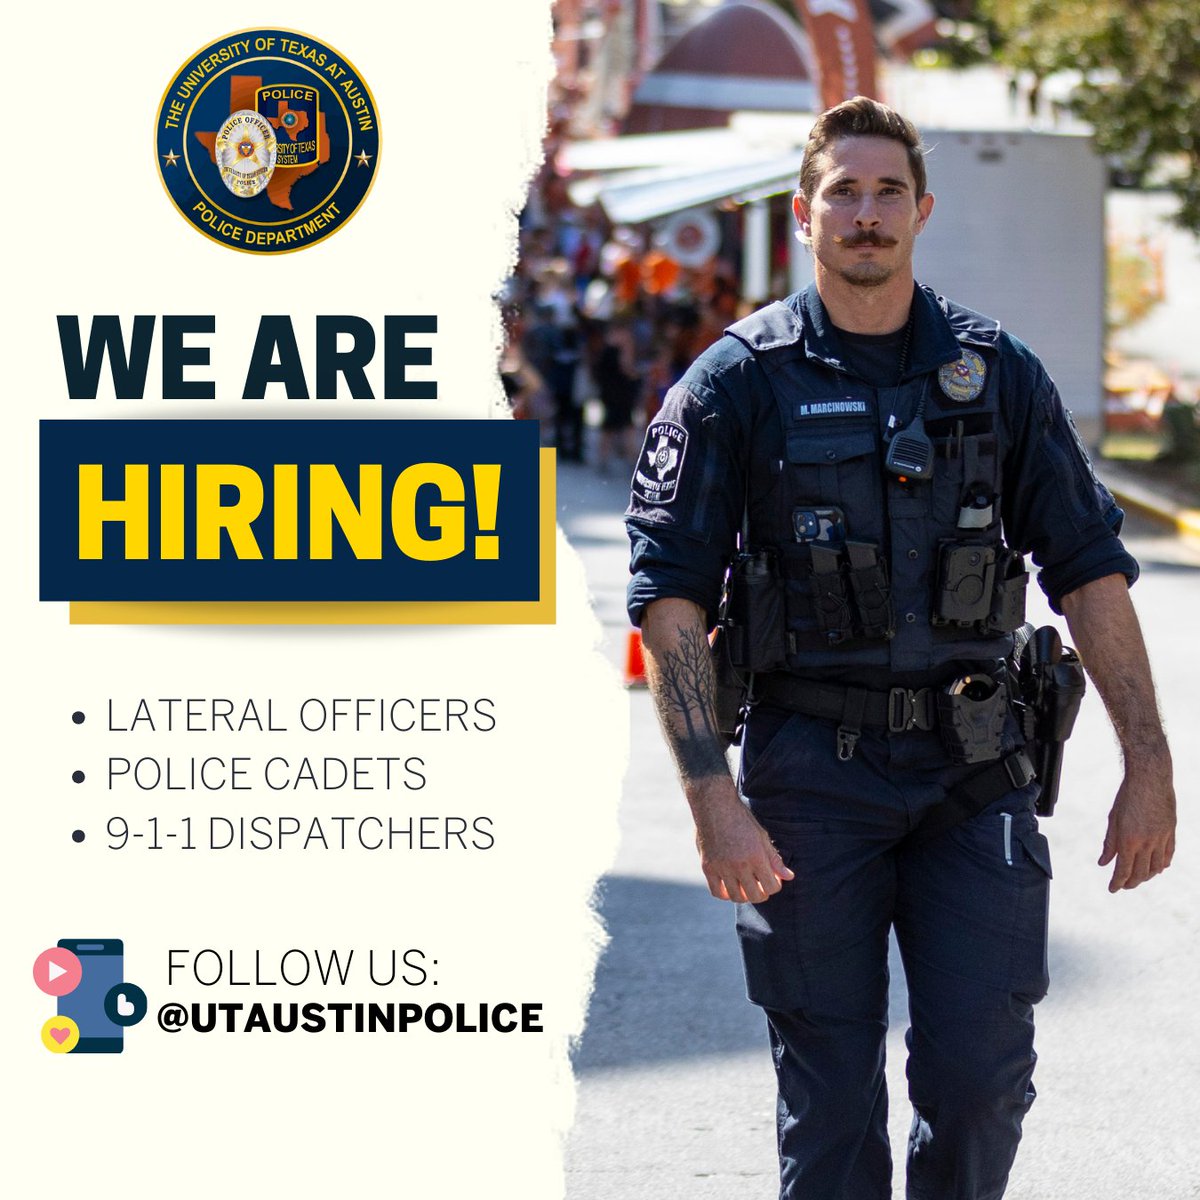 📢UTPD is looking to hire lateral officers, new police cadets, and 9-1-1 dispatchers! Do you have a passion for helping others? Help keep UT Austin safe and apply to join our team today: police.utexas.edu/careers🤘🏾

#NowHiring #JoinUTPD #PoliceJobs #TexasJobs #UTJobs